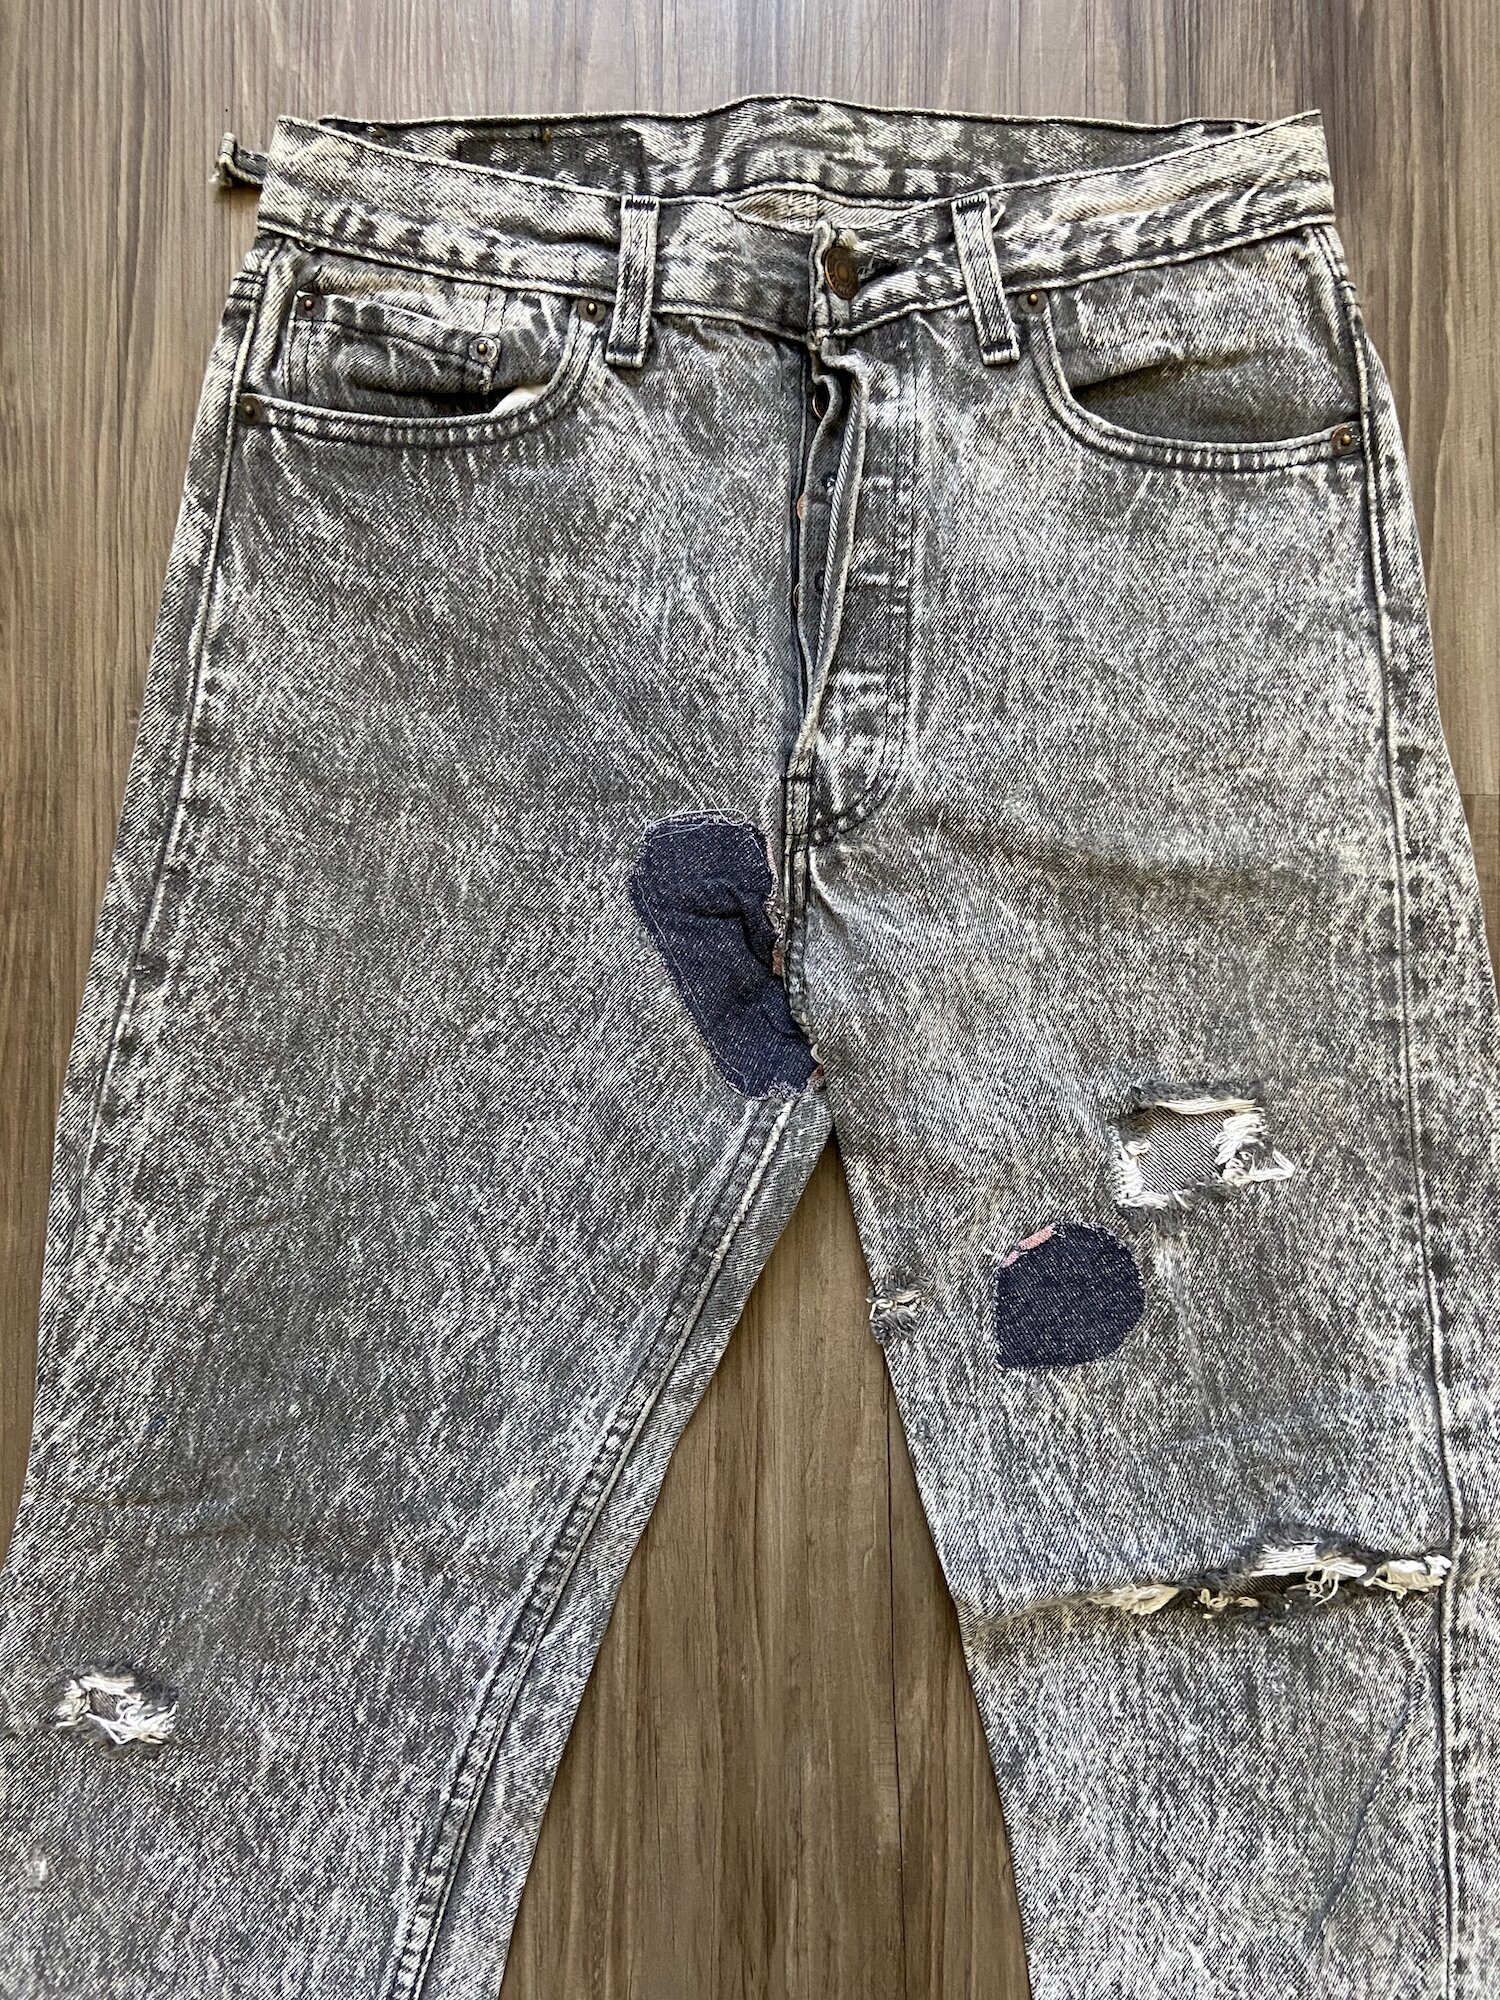 Vintage Levi's 501 Holy Patched Distressed Denim Jeans — DEAD PEOPLE'S SHIT